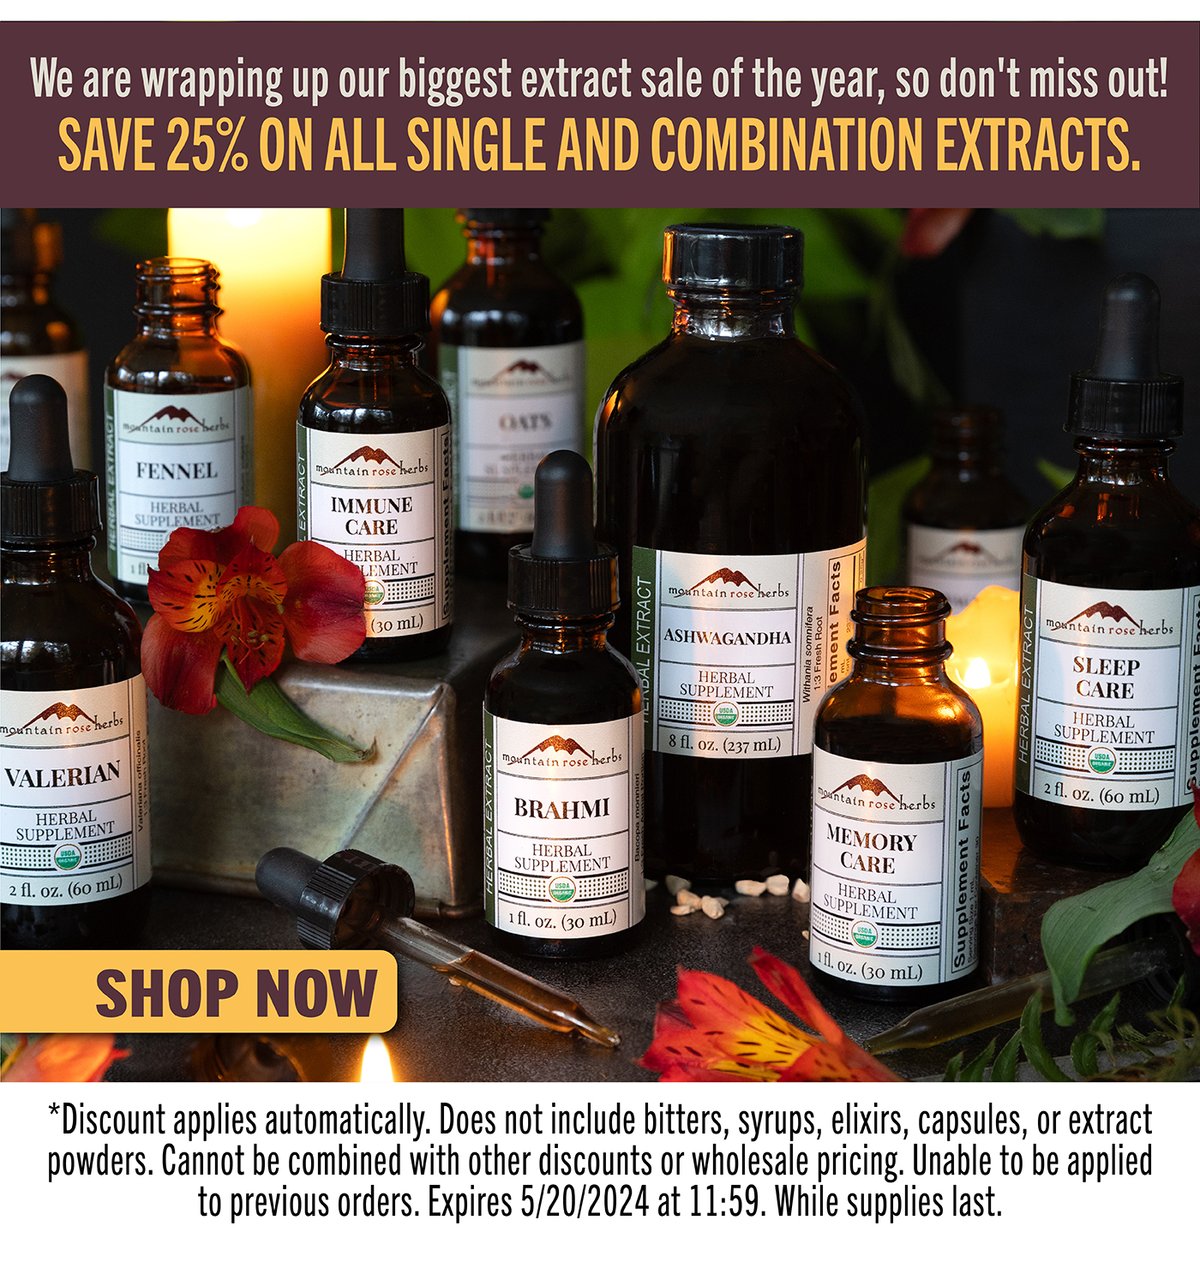 Save 25% on Extracts